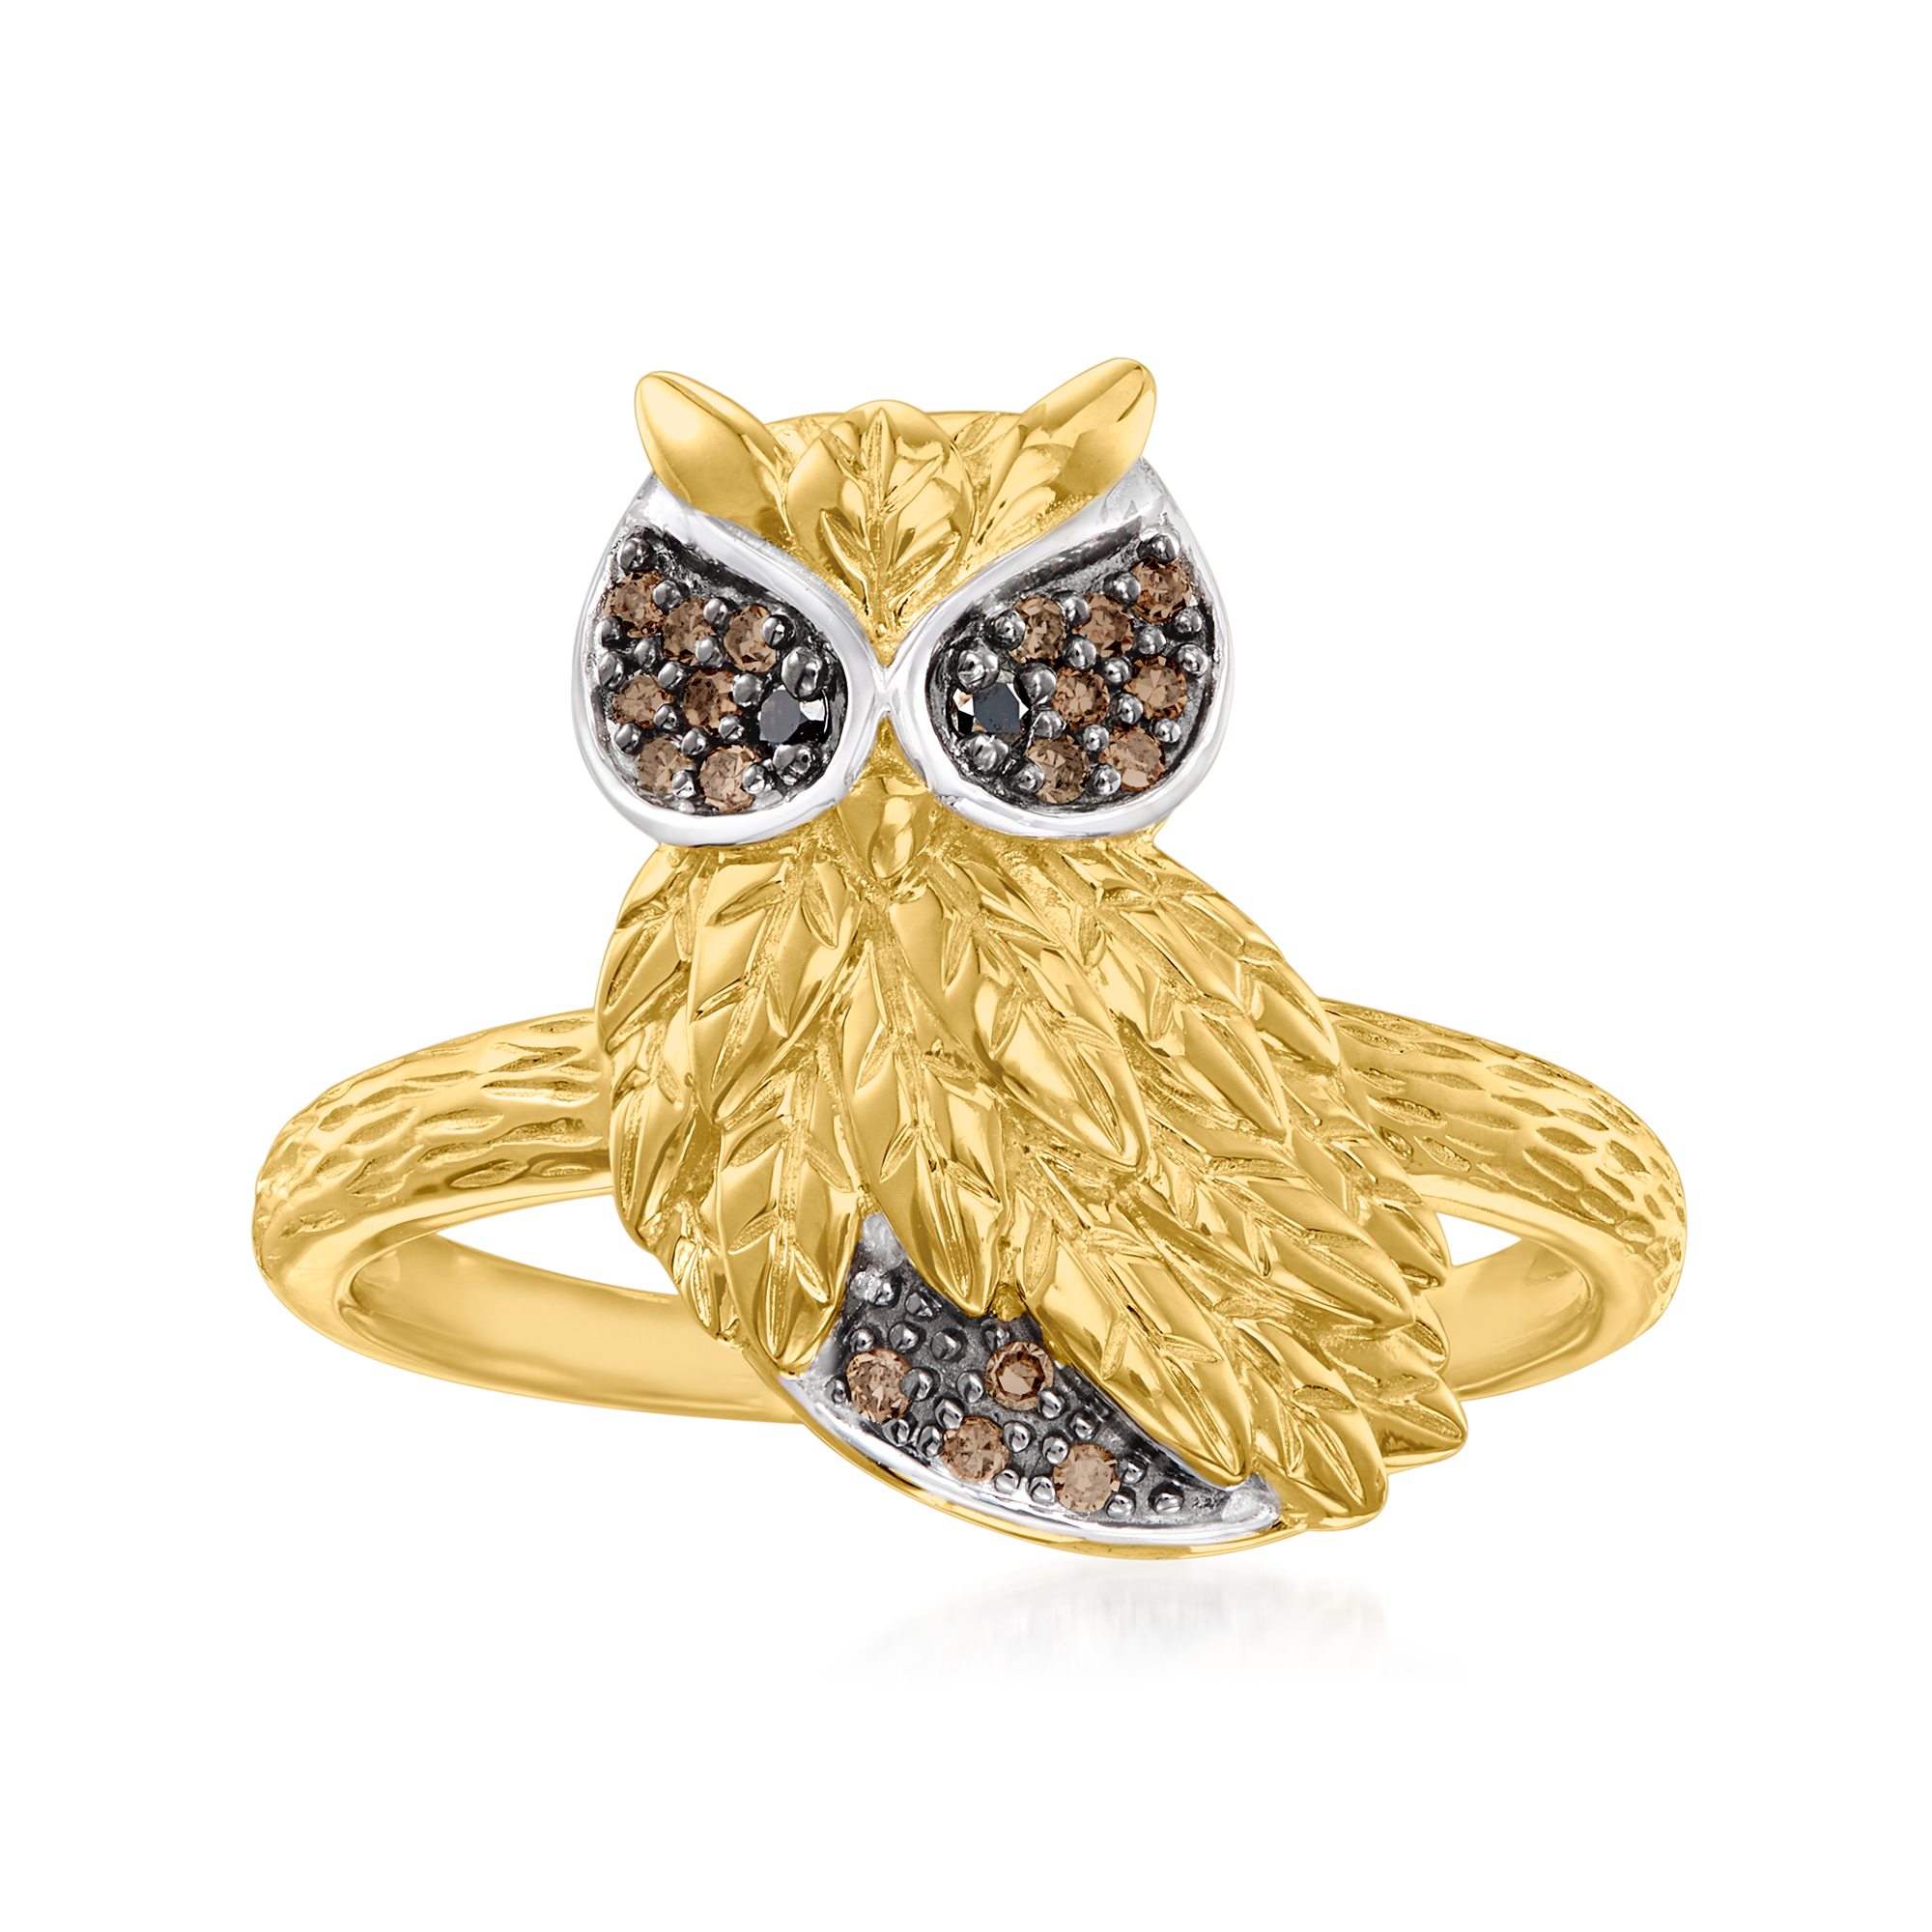 Black and Brown Diamond-Accented Owl Ring in 18kt Gold Over Sterling |  Ross-Simons